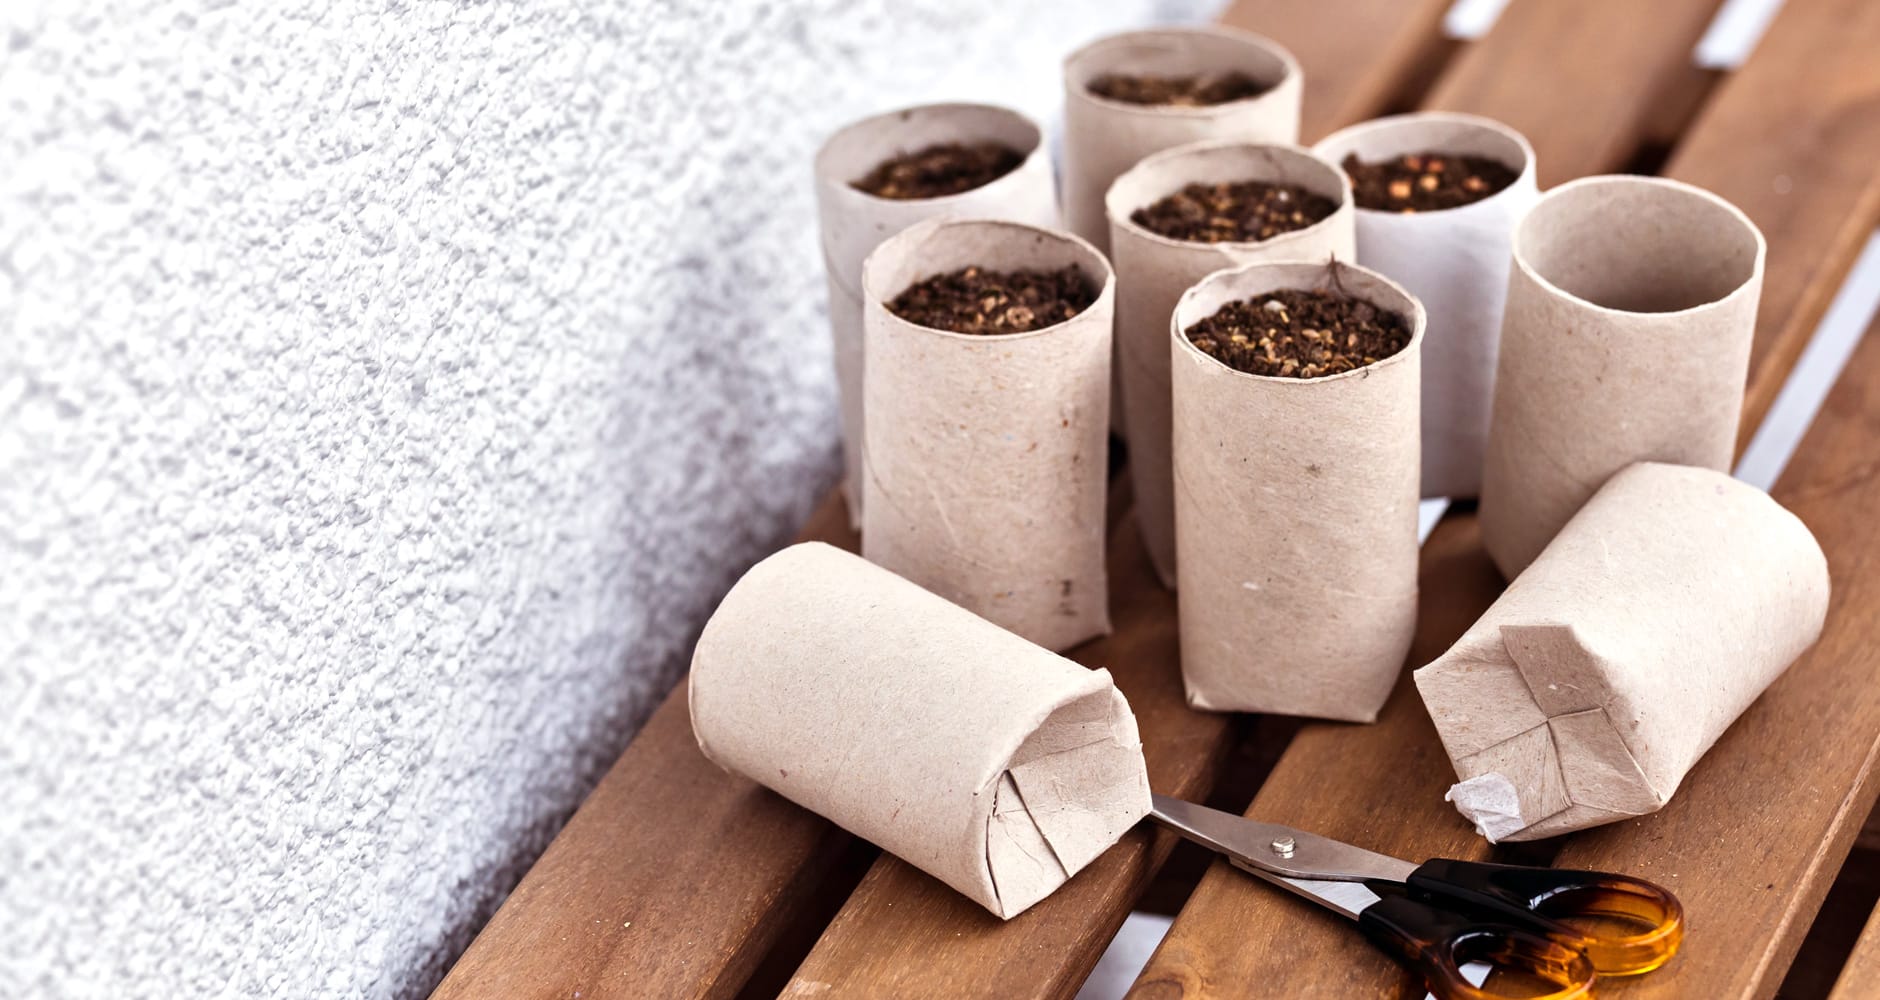 Creative Uses For Toilet Paper Rolls